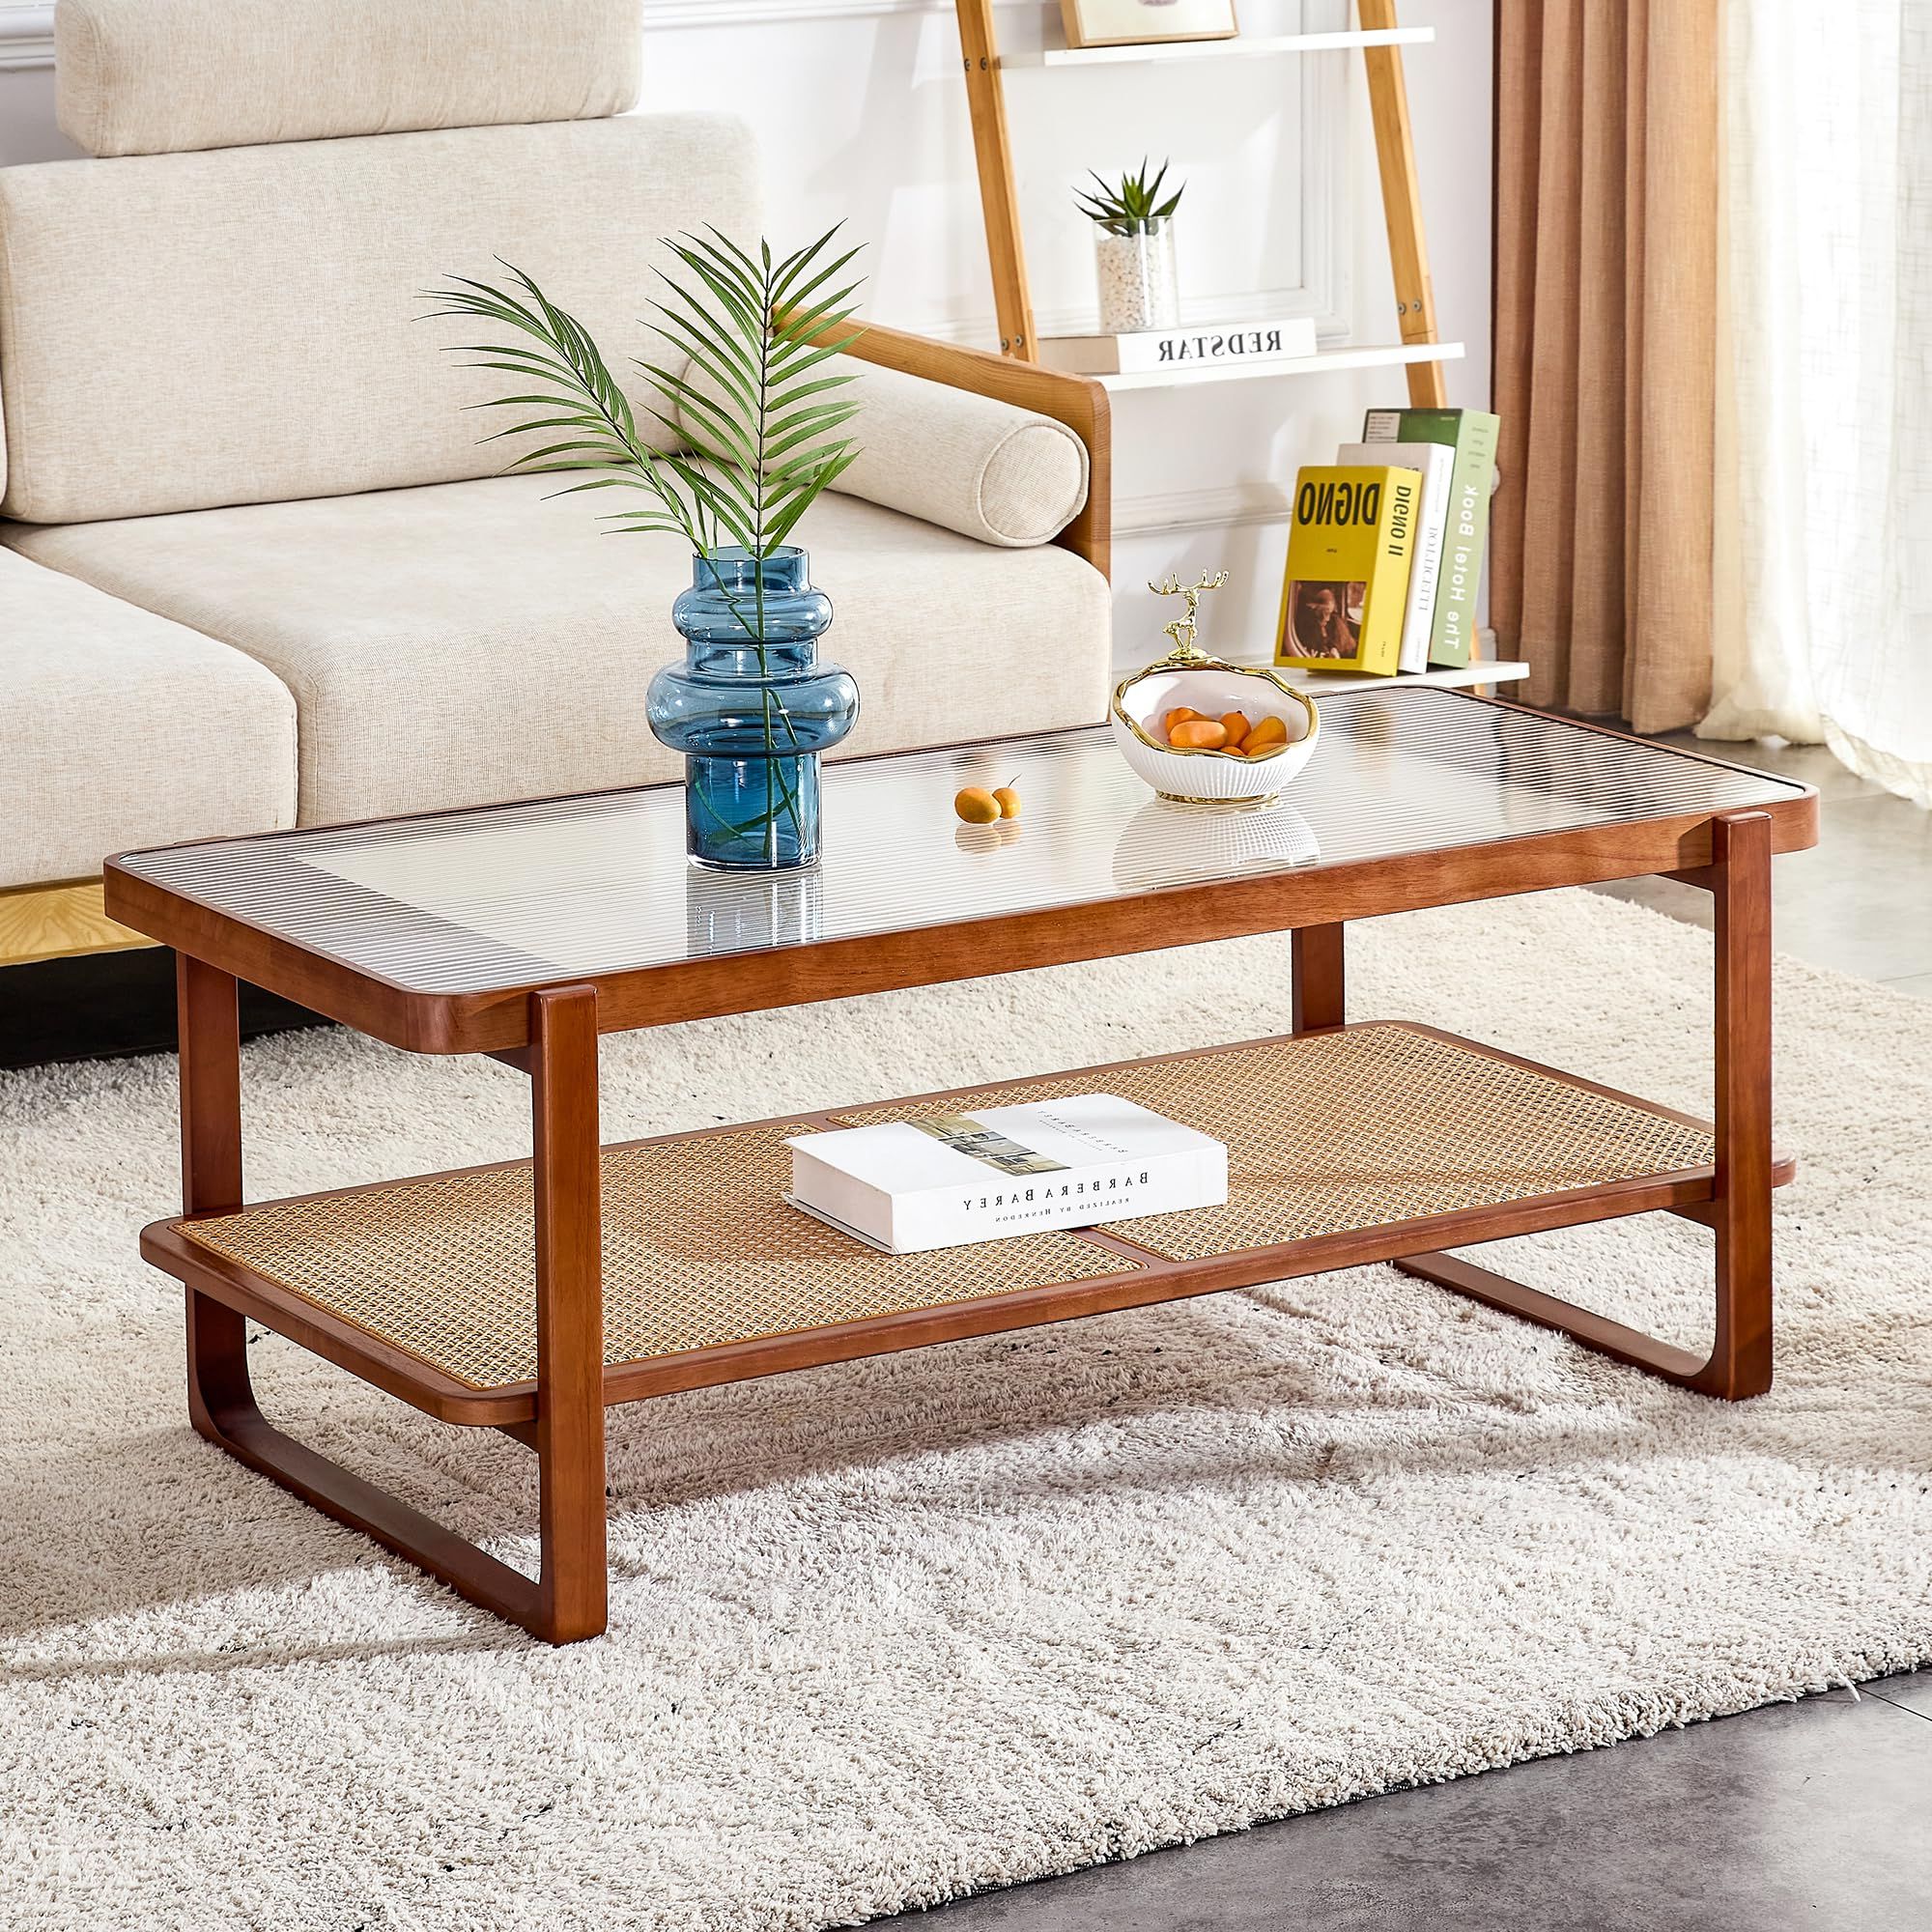 2019 Mid Century Modern Coffee Tables Inside Amazon: Ganooly Mid Century Modern Coffee Table With Ribbed Glass Top  And Pe Rattan Storage Shelf, 45 Inch Rectangular Solid Wood Boho Coffe Table,  Unique Center Table For Livinig Room Apartment Small (View 5 of 10)